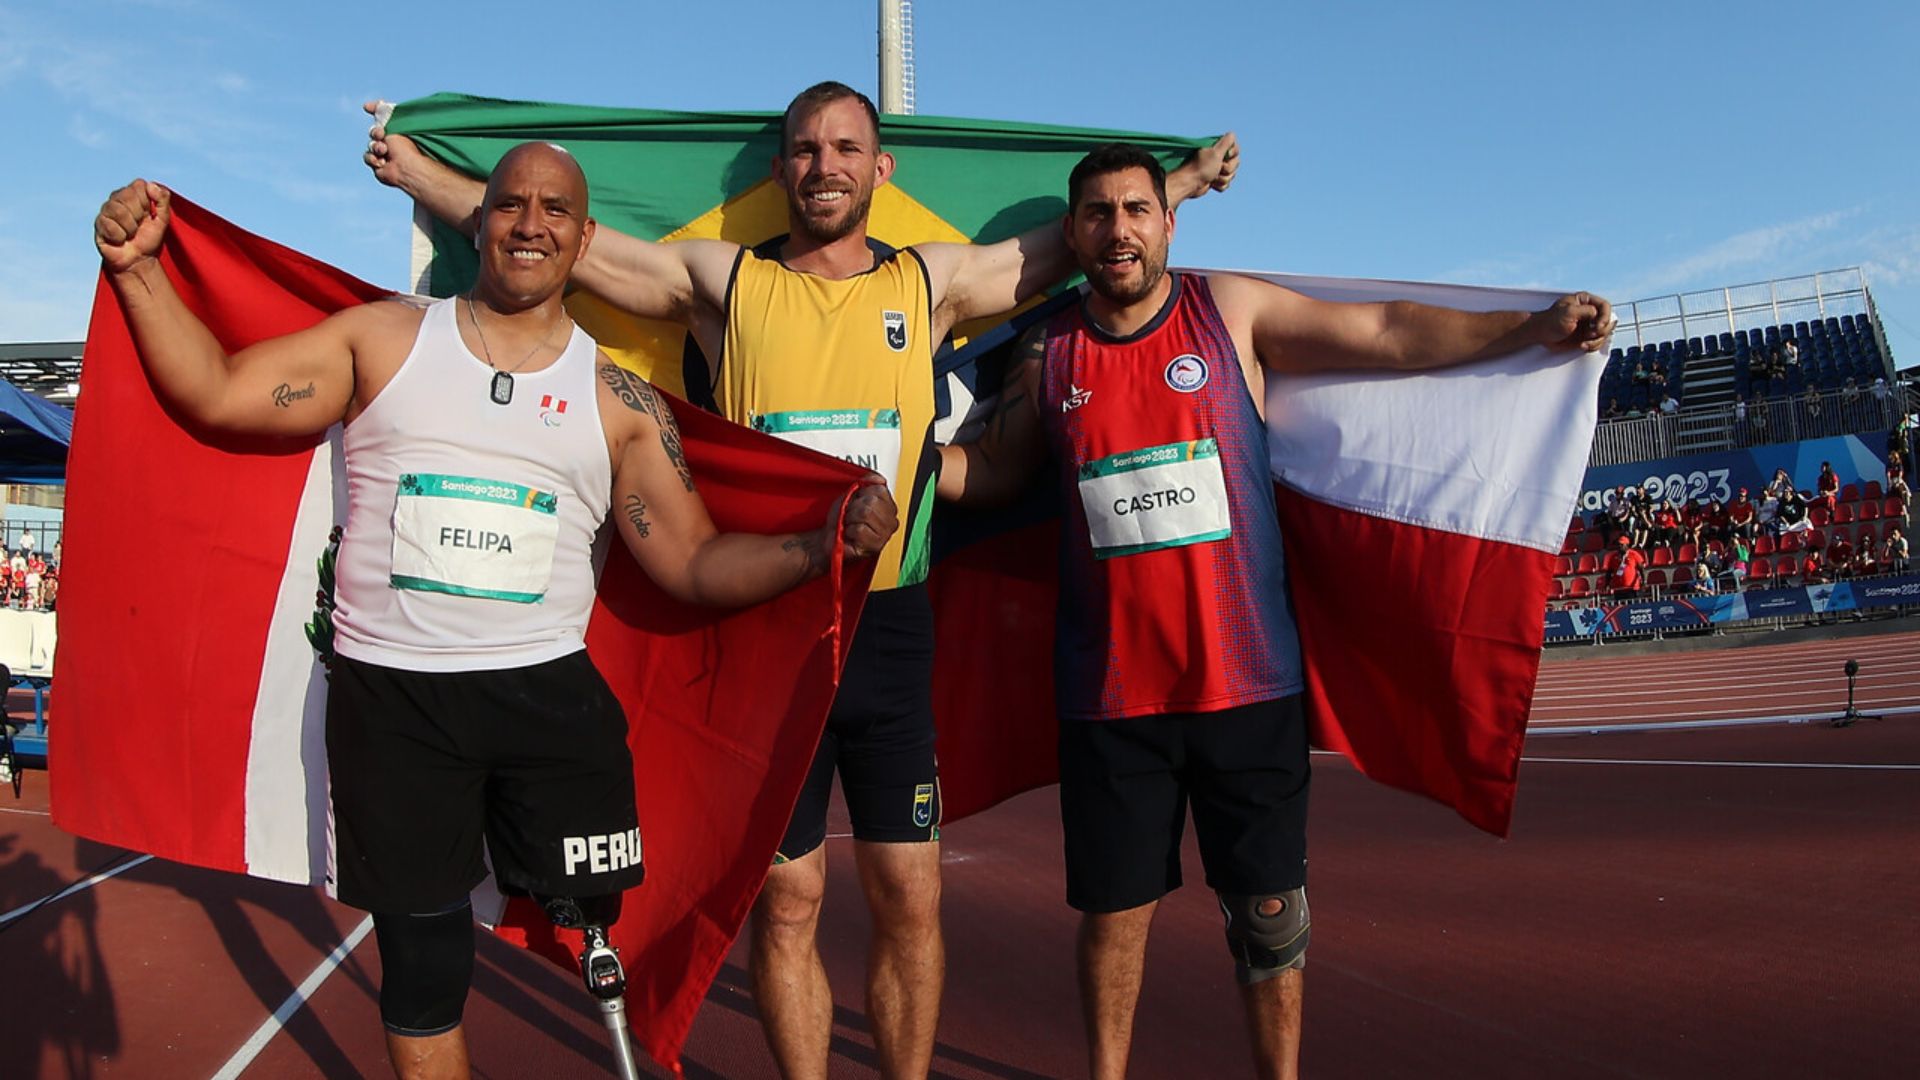 Brazil Secures Gold and Sets a New Parapan American Record in F63 Shot Put